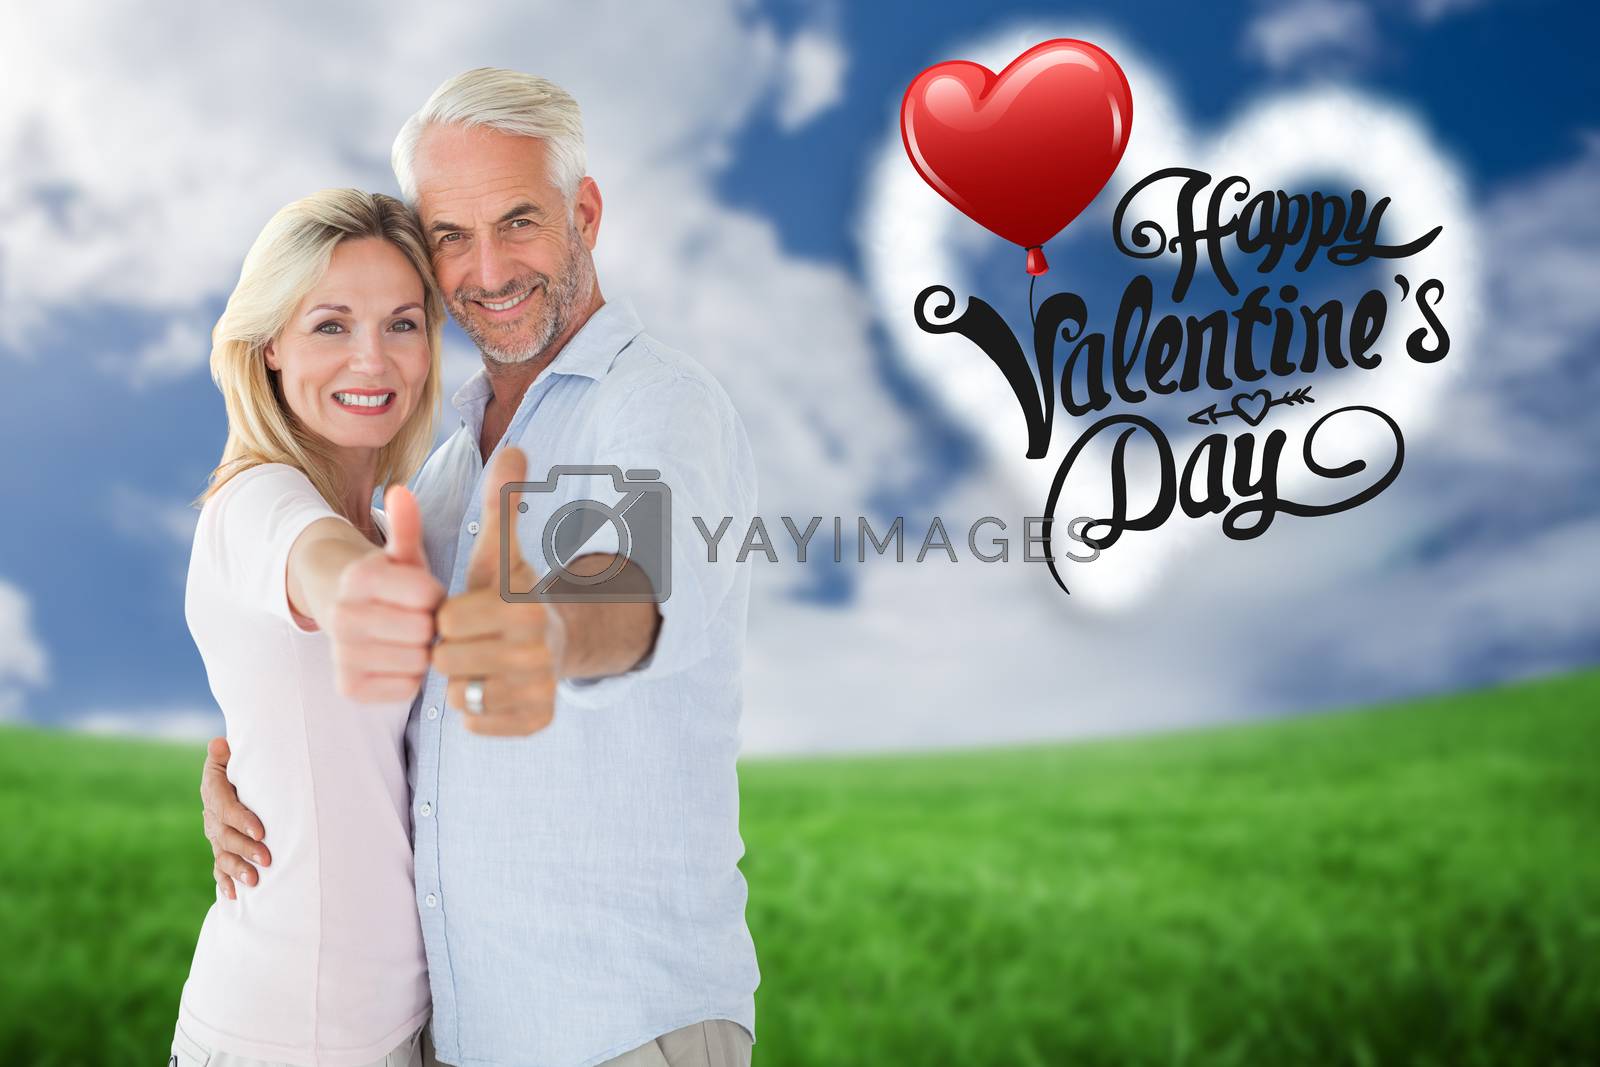 Royalty free image of Composite image of smiling couple showing thumbs up together by Wavebreakmedia